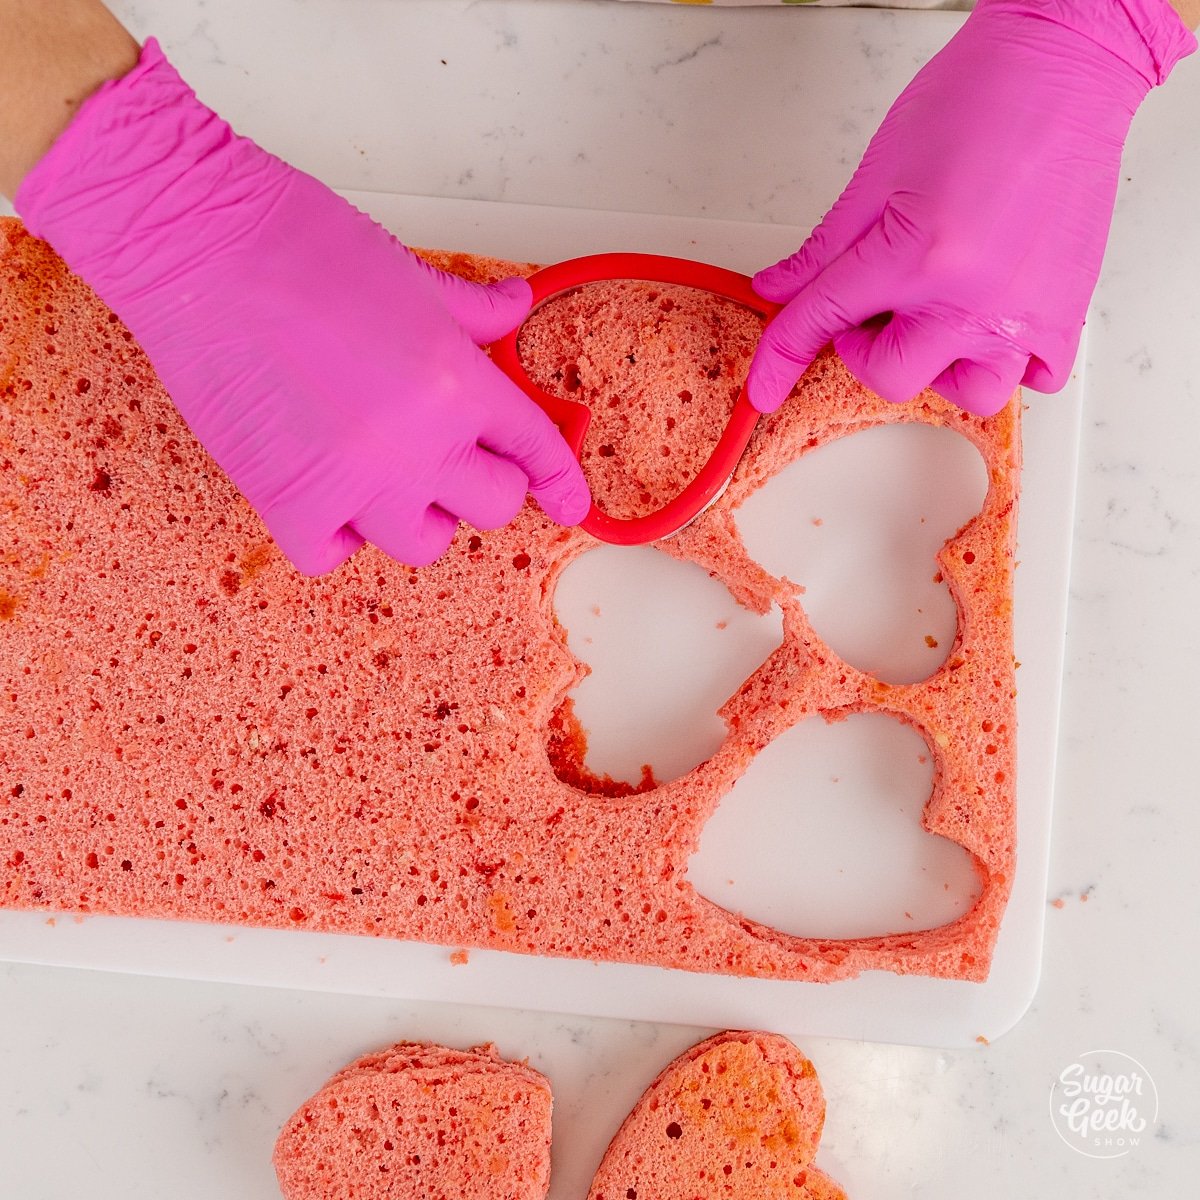 hands pushing a heart shaped cutter into a pink cake